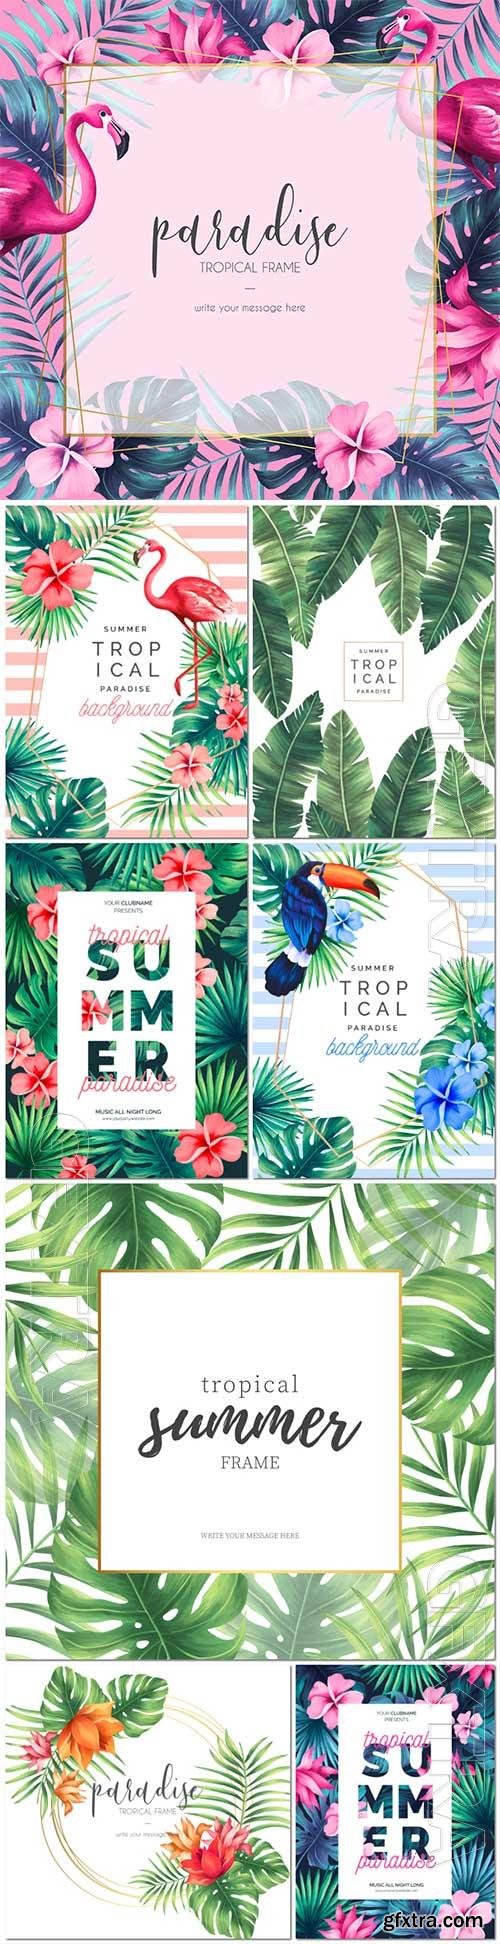 Tropical paradise background vector illustration